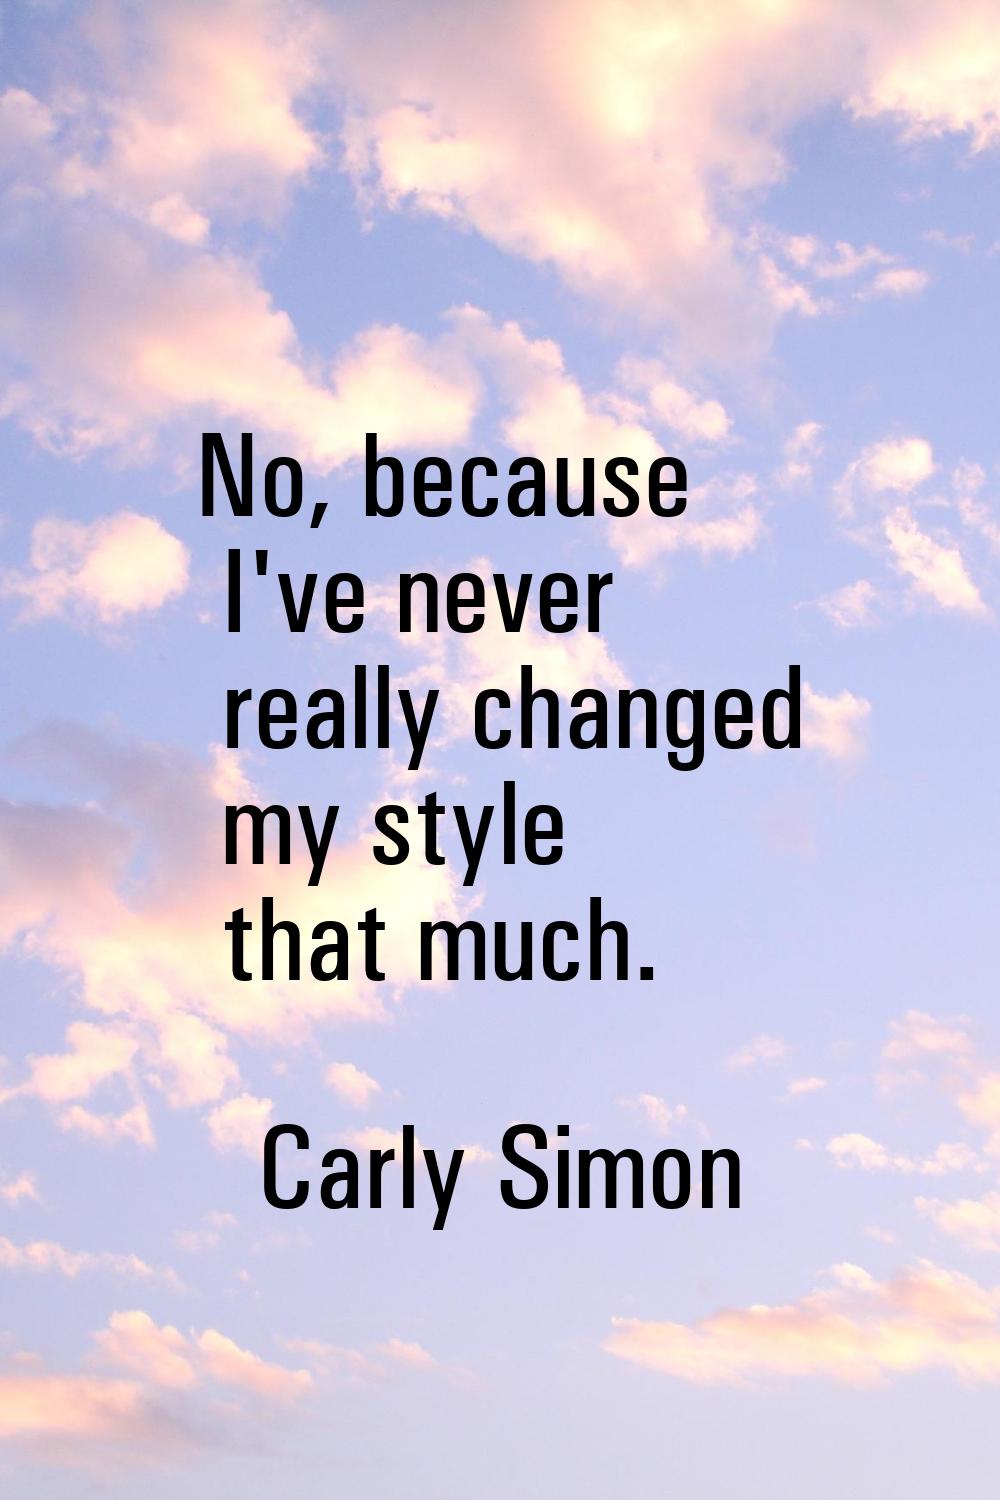 No, because I've never really changed my style that much.